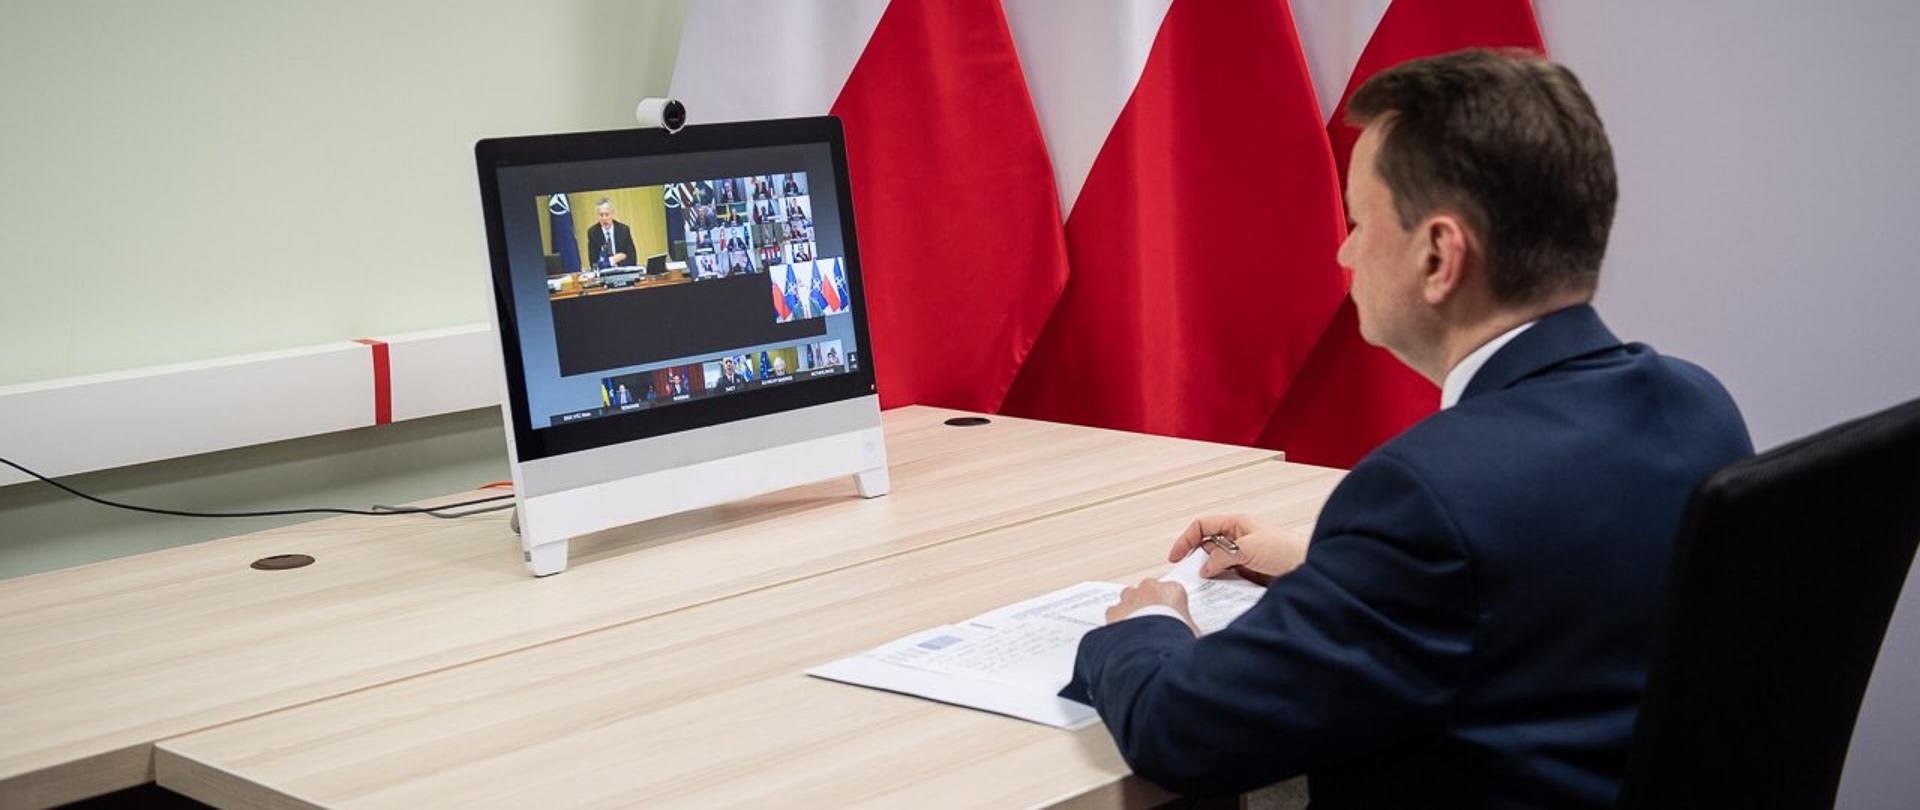 Videoconference of NATO defence ministers. Minister of National Defence Mariusz Błaszczak takes part.